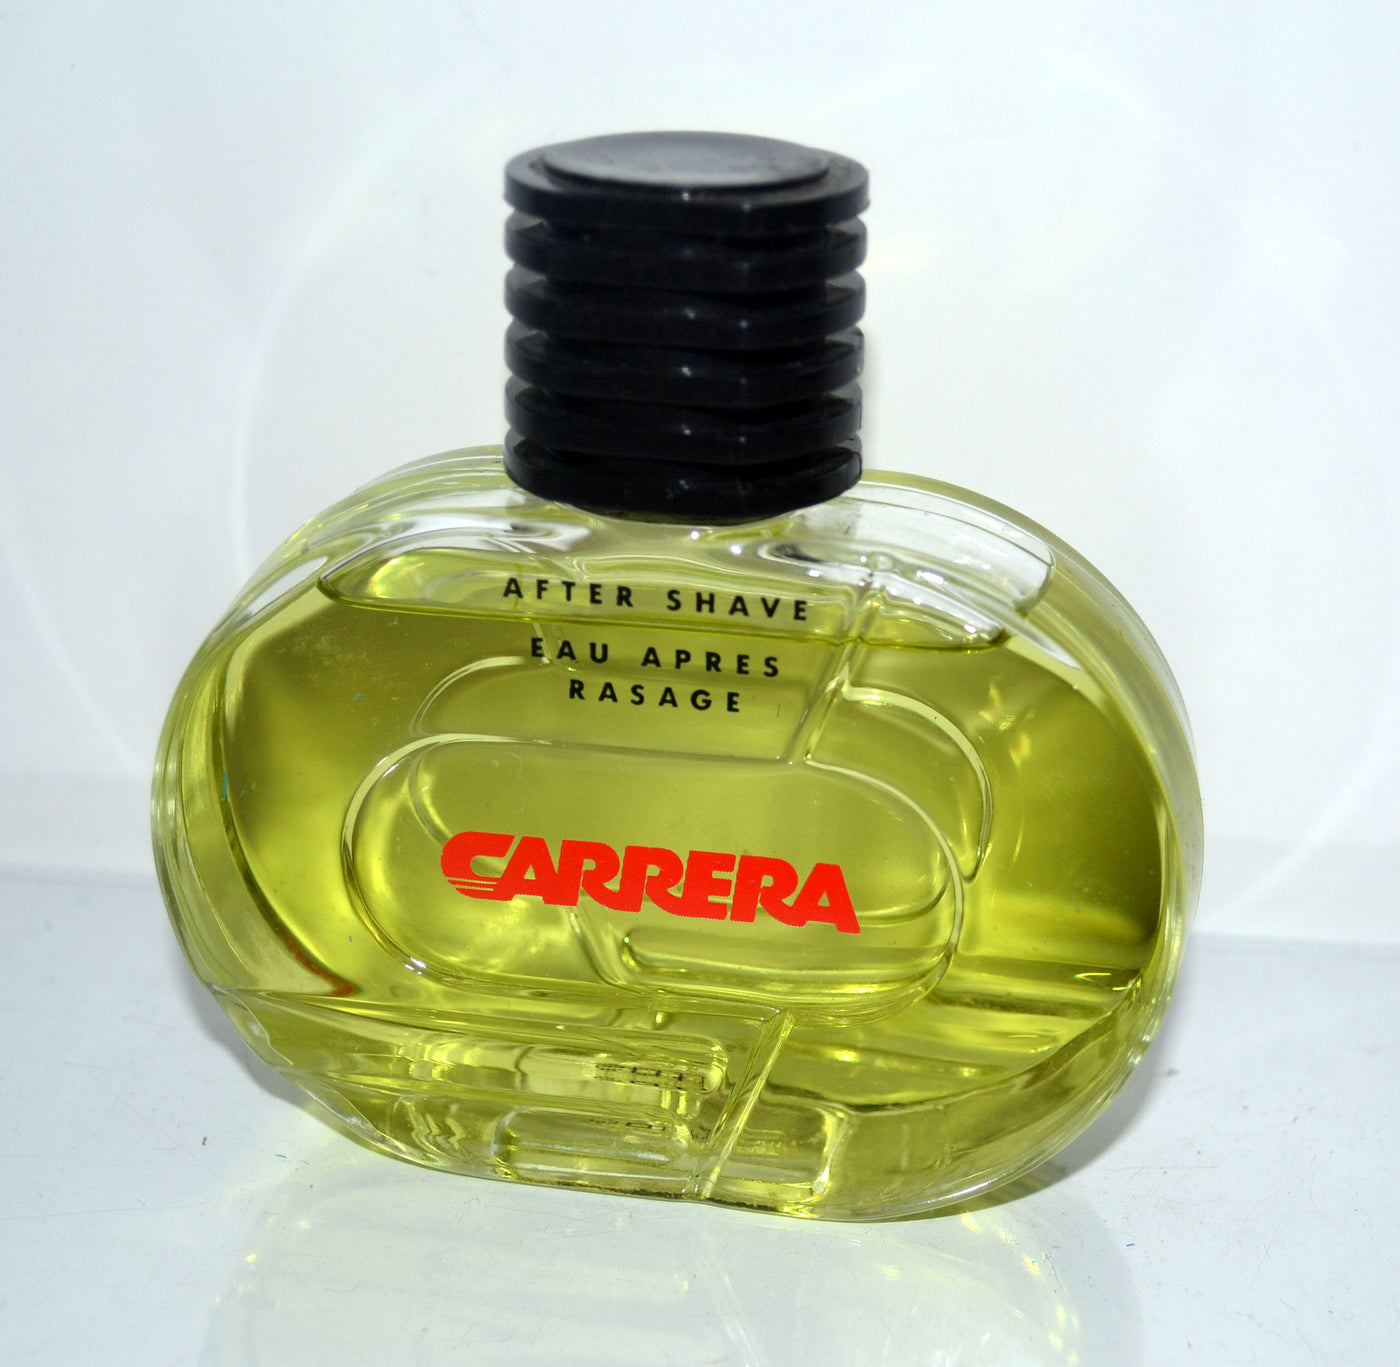  Carrera After Shave